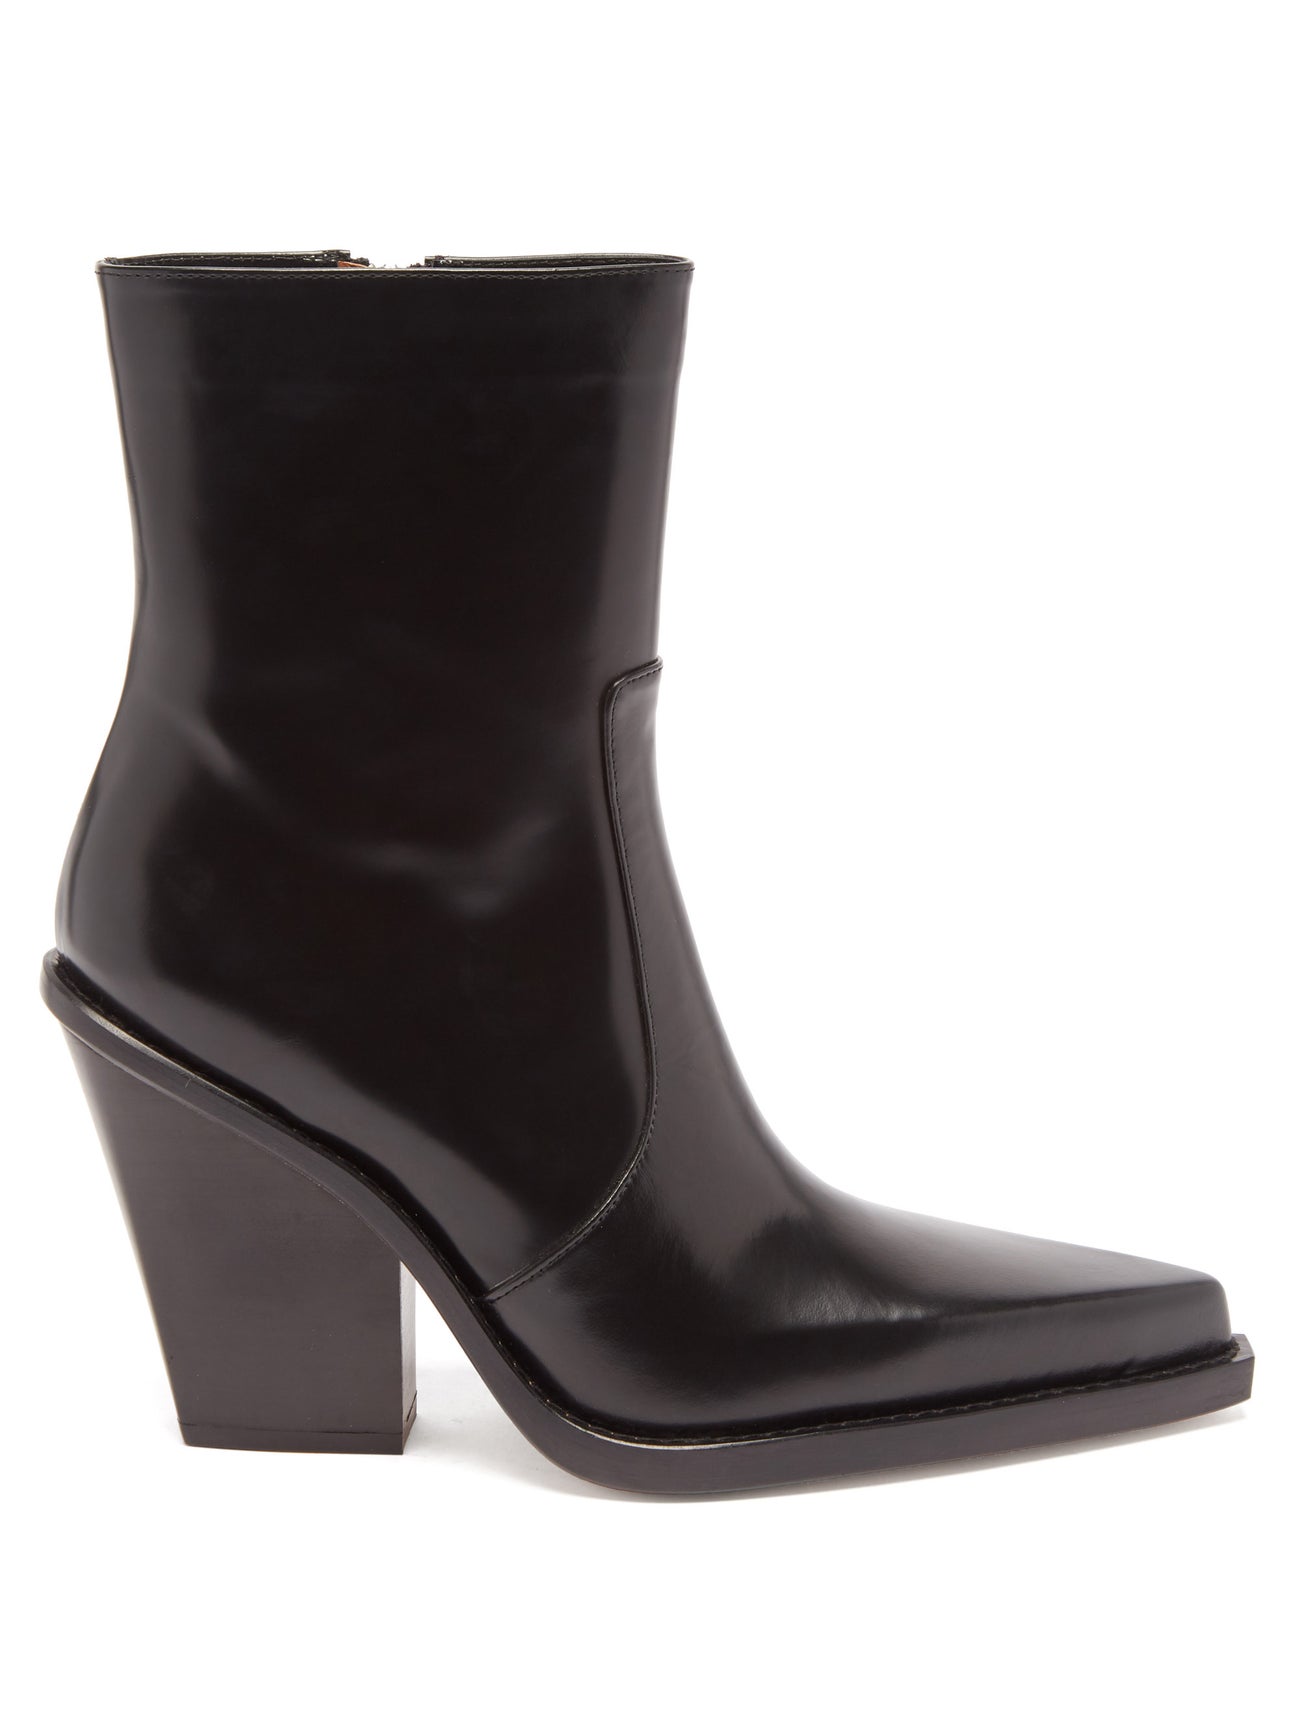 Paris Texas Rodeo Point-Toe Leather Ankle Boots